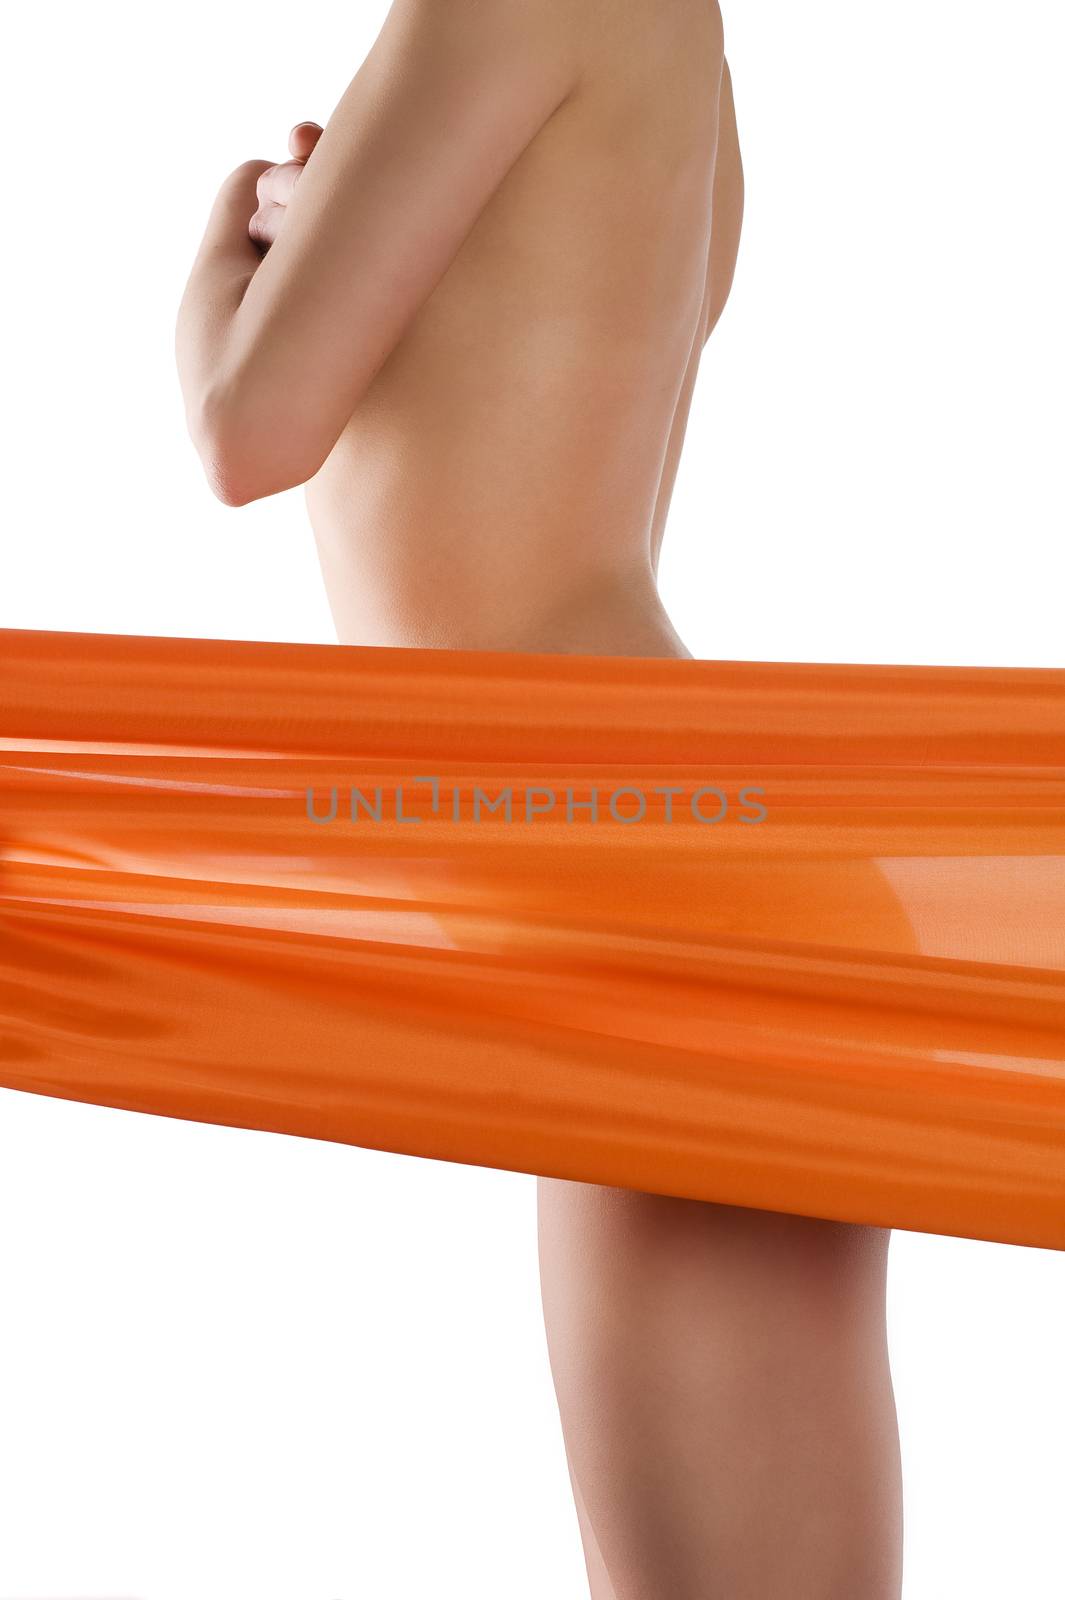 naked woman body with orange marterial by fotoCD